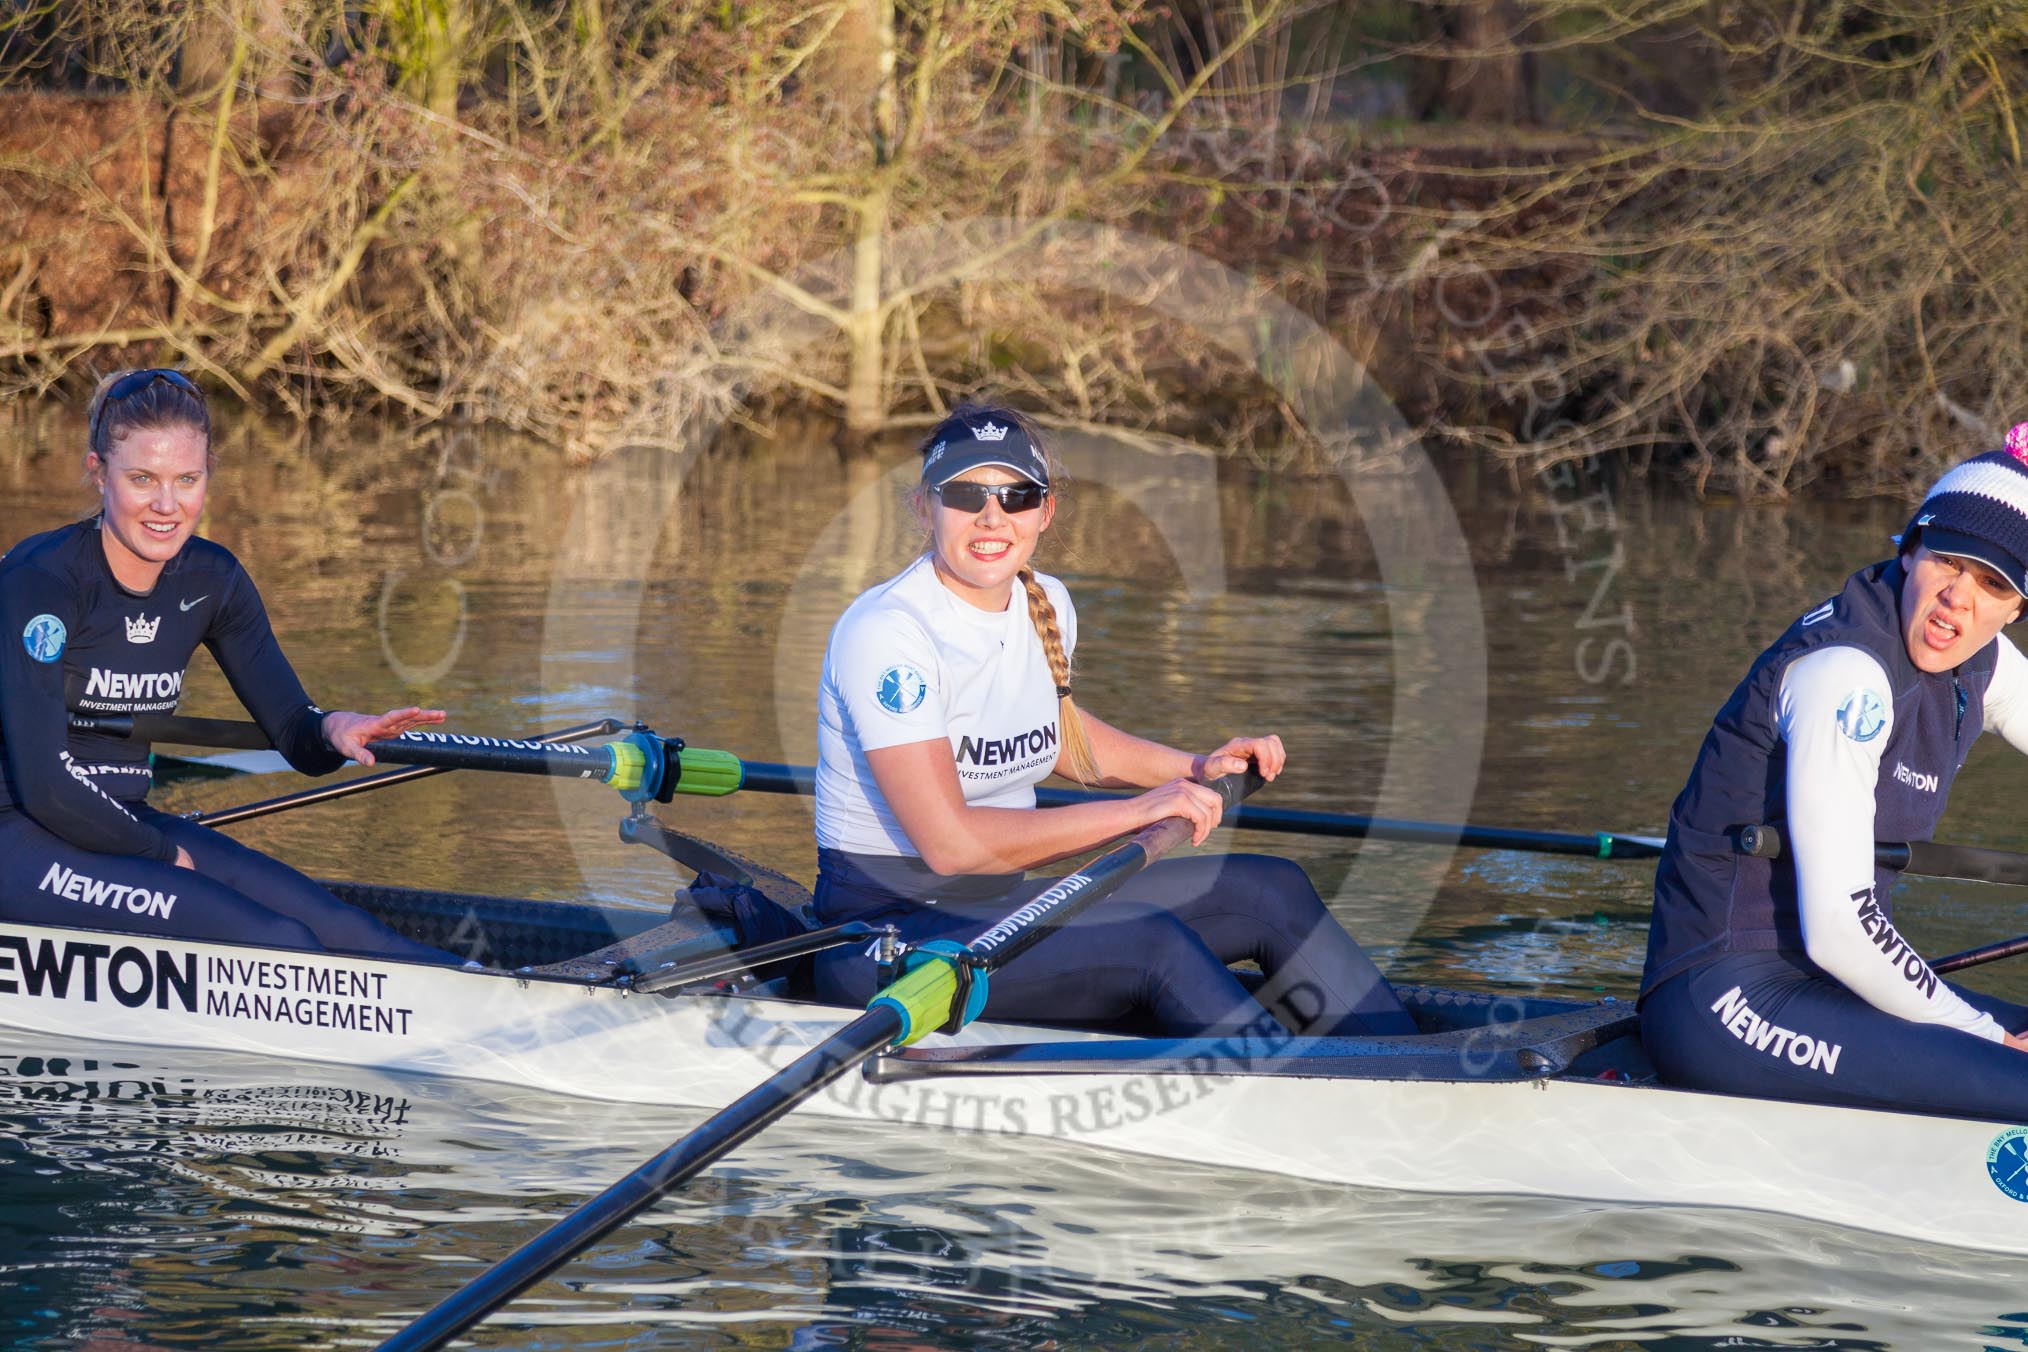 The Boat Race season 2015: OUWBC training Wallingford.

Wallingford,

United Kingdom,
on 04 March 2015 at 17:03, image #248